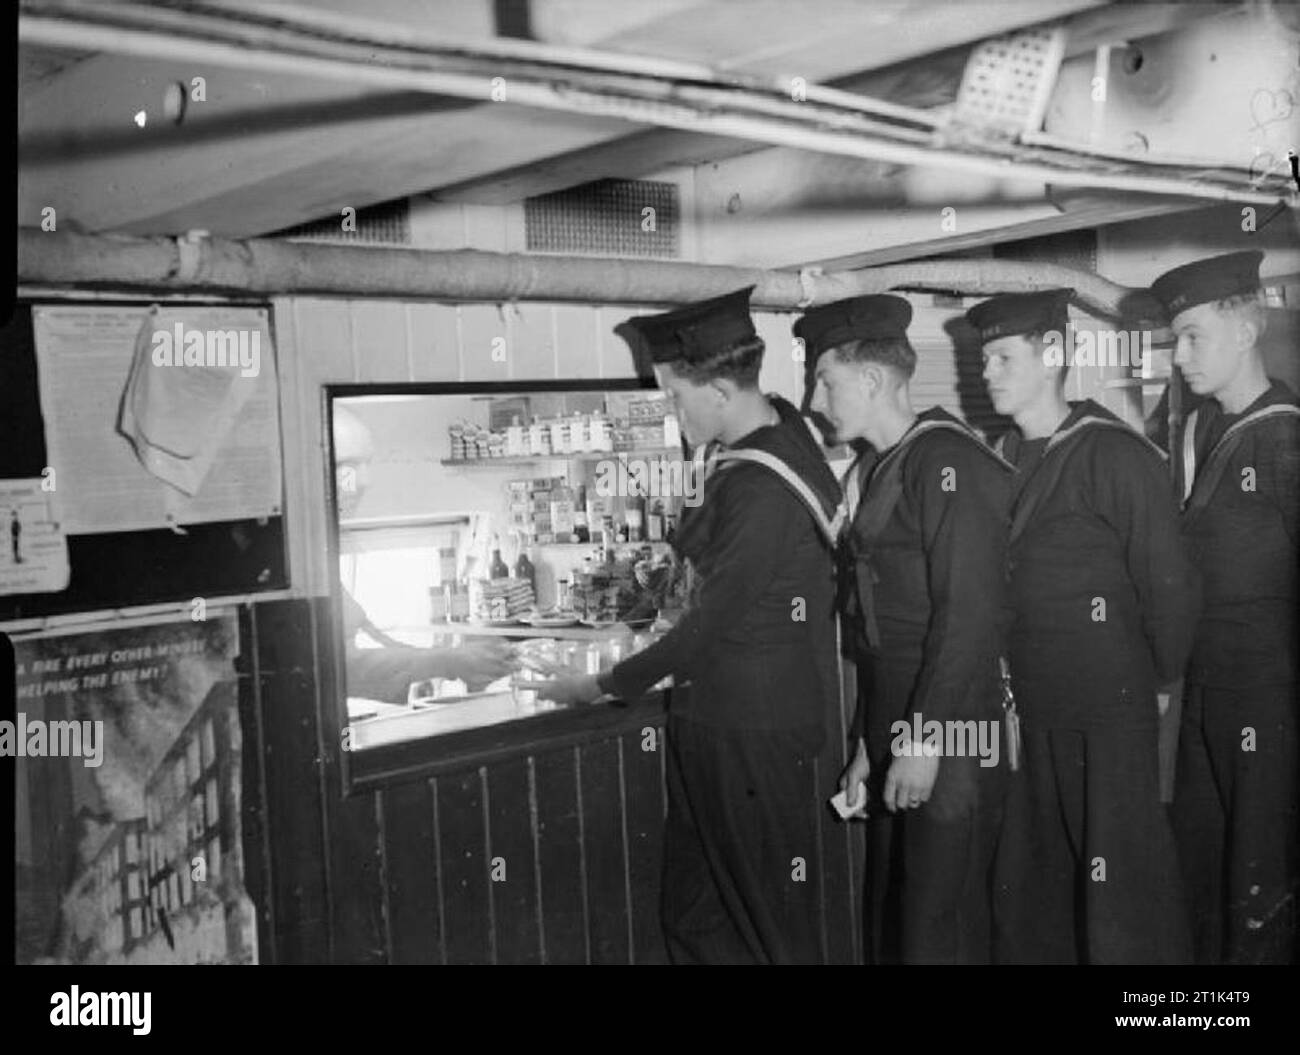 Training in the Royal Navy, Aboard HMS Implacable, Portsmouth, 6 October 1944 Lining up for 'Nutty' (sweets, chocolate etc) at the well stocked NAAFI canteen on board the IMPLACABLE. Stock Photo